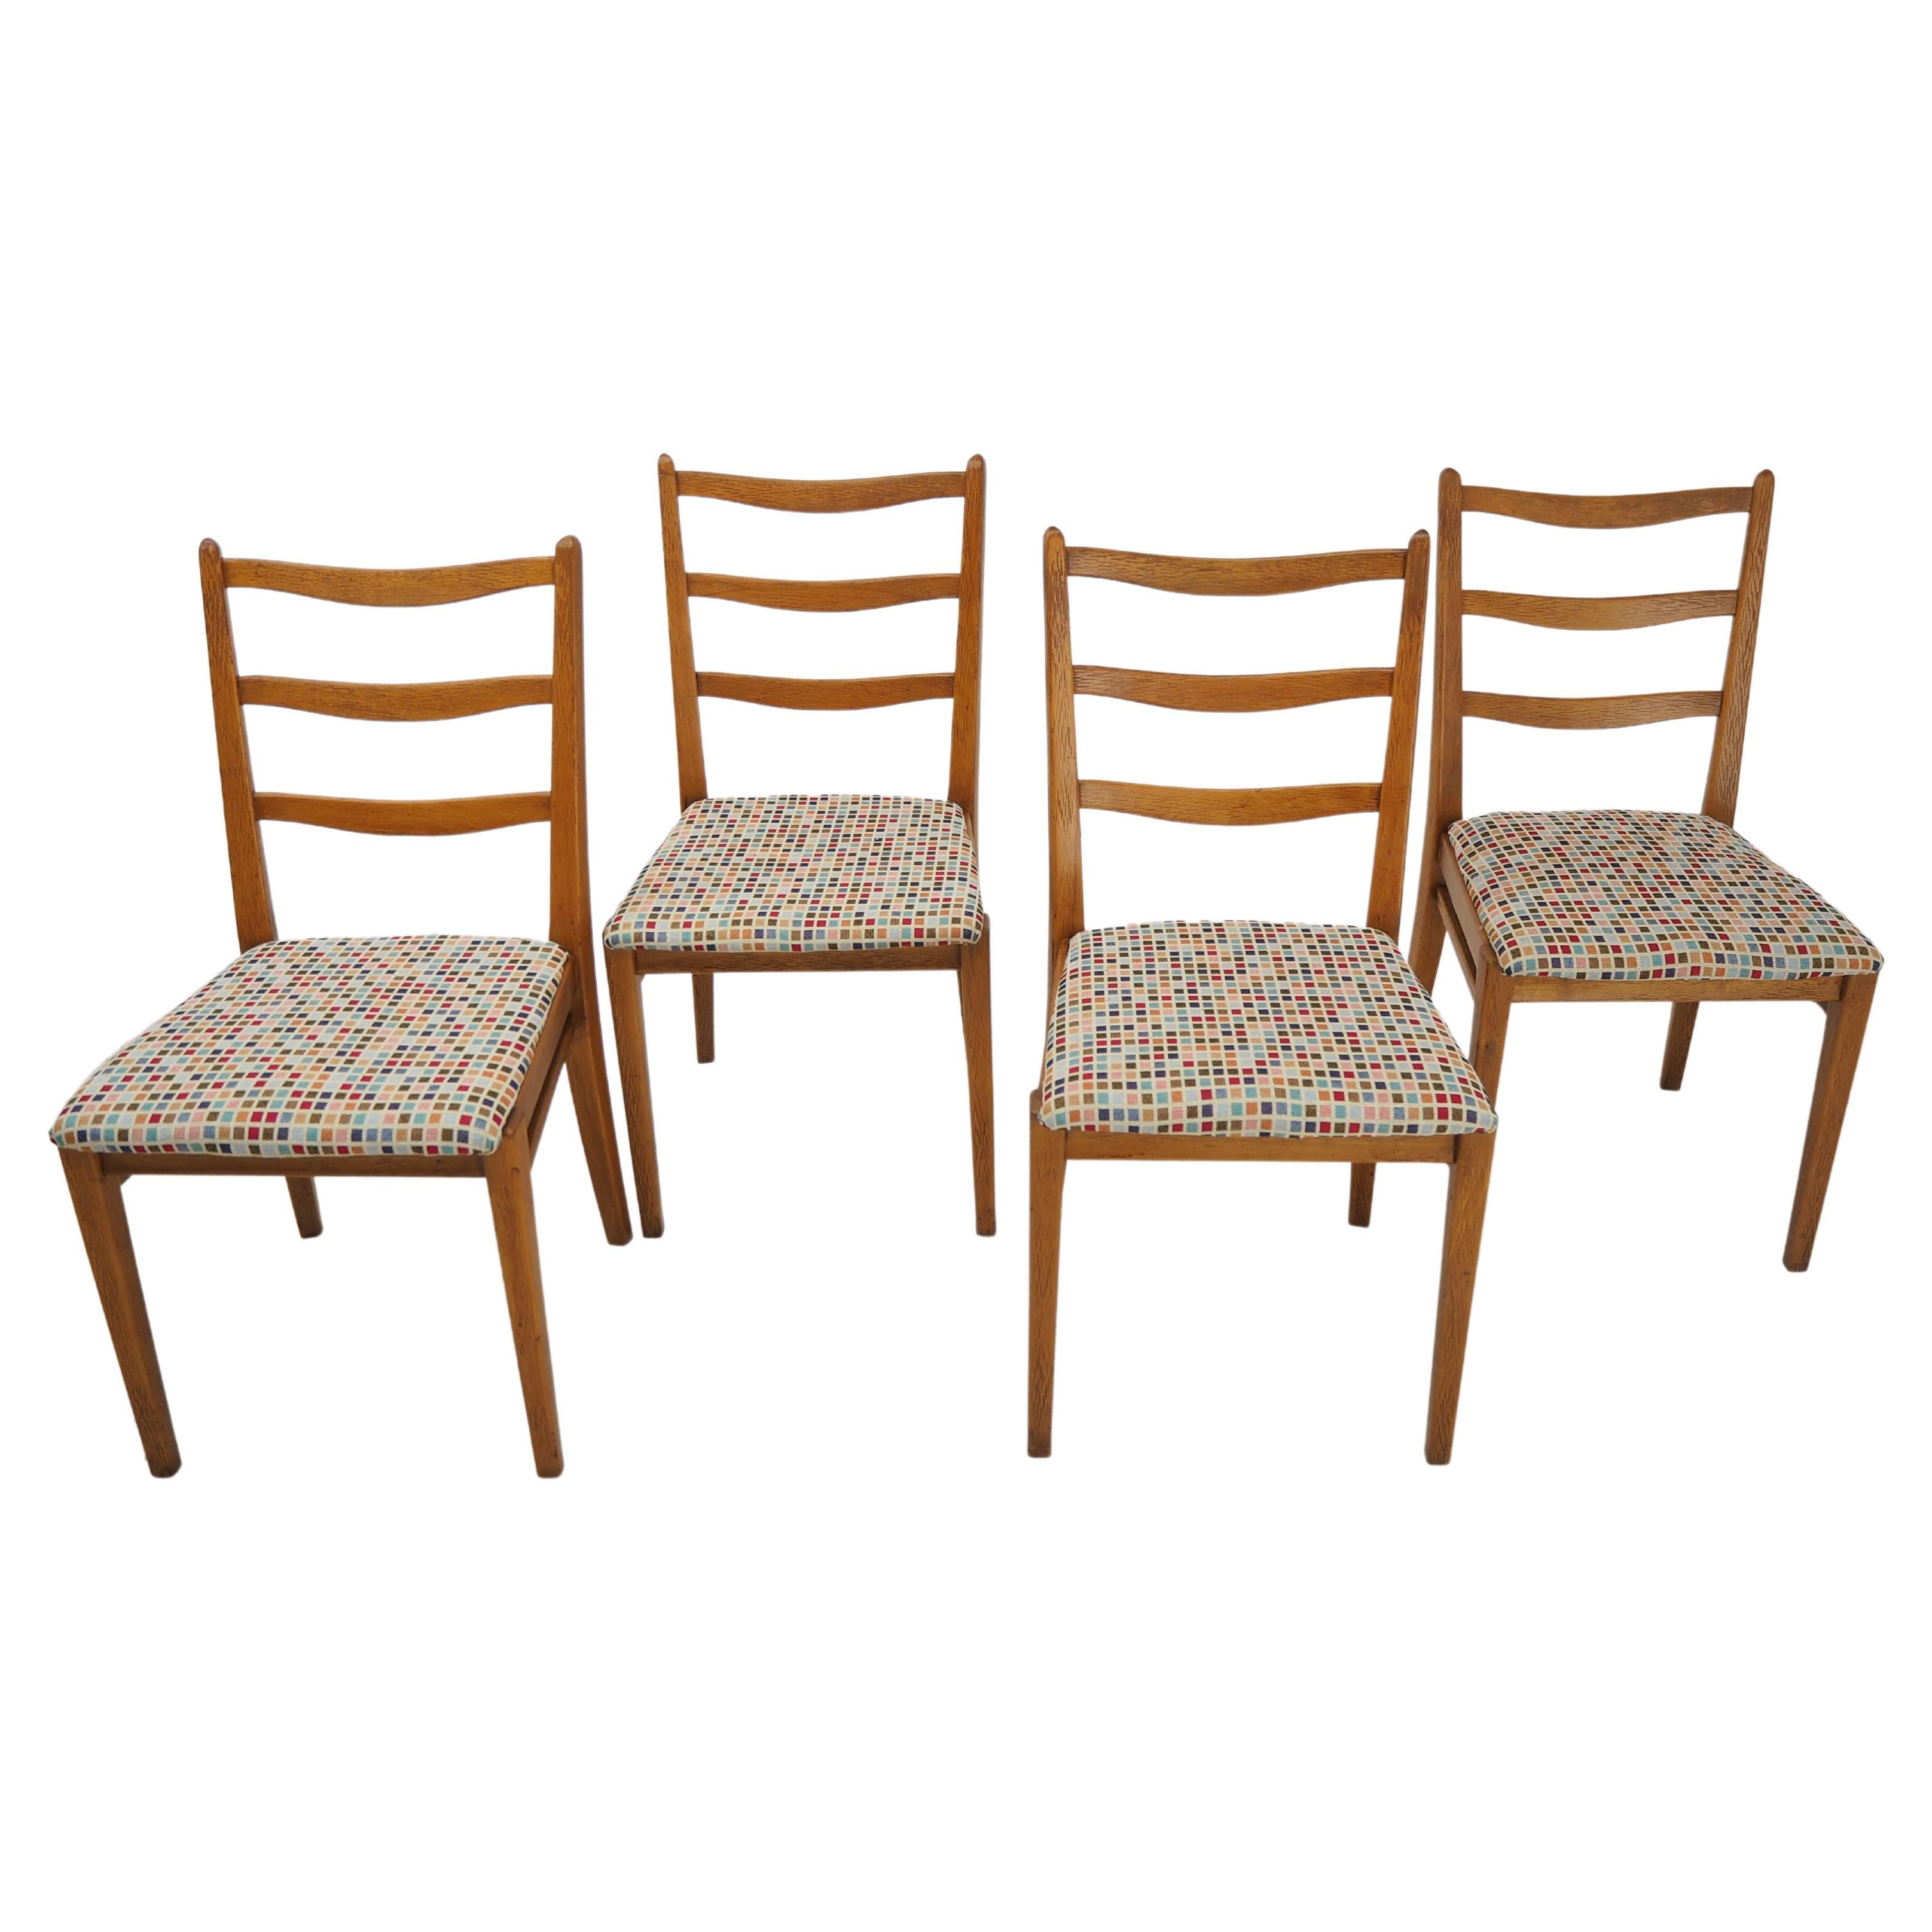 Set of 4 Midcentury Dining Chairs, Interier Praha, Czechoslovakia, 1970s For Sale